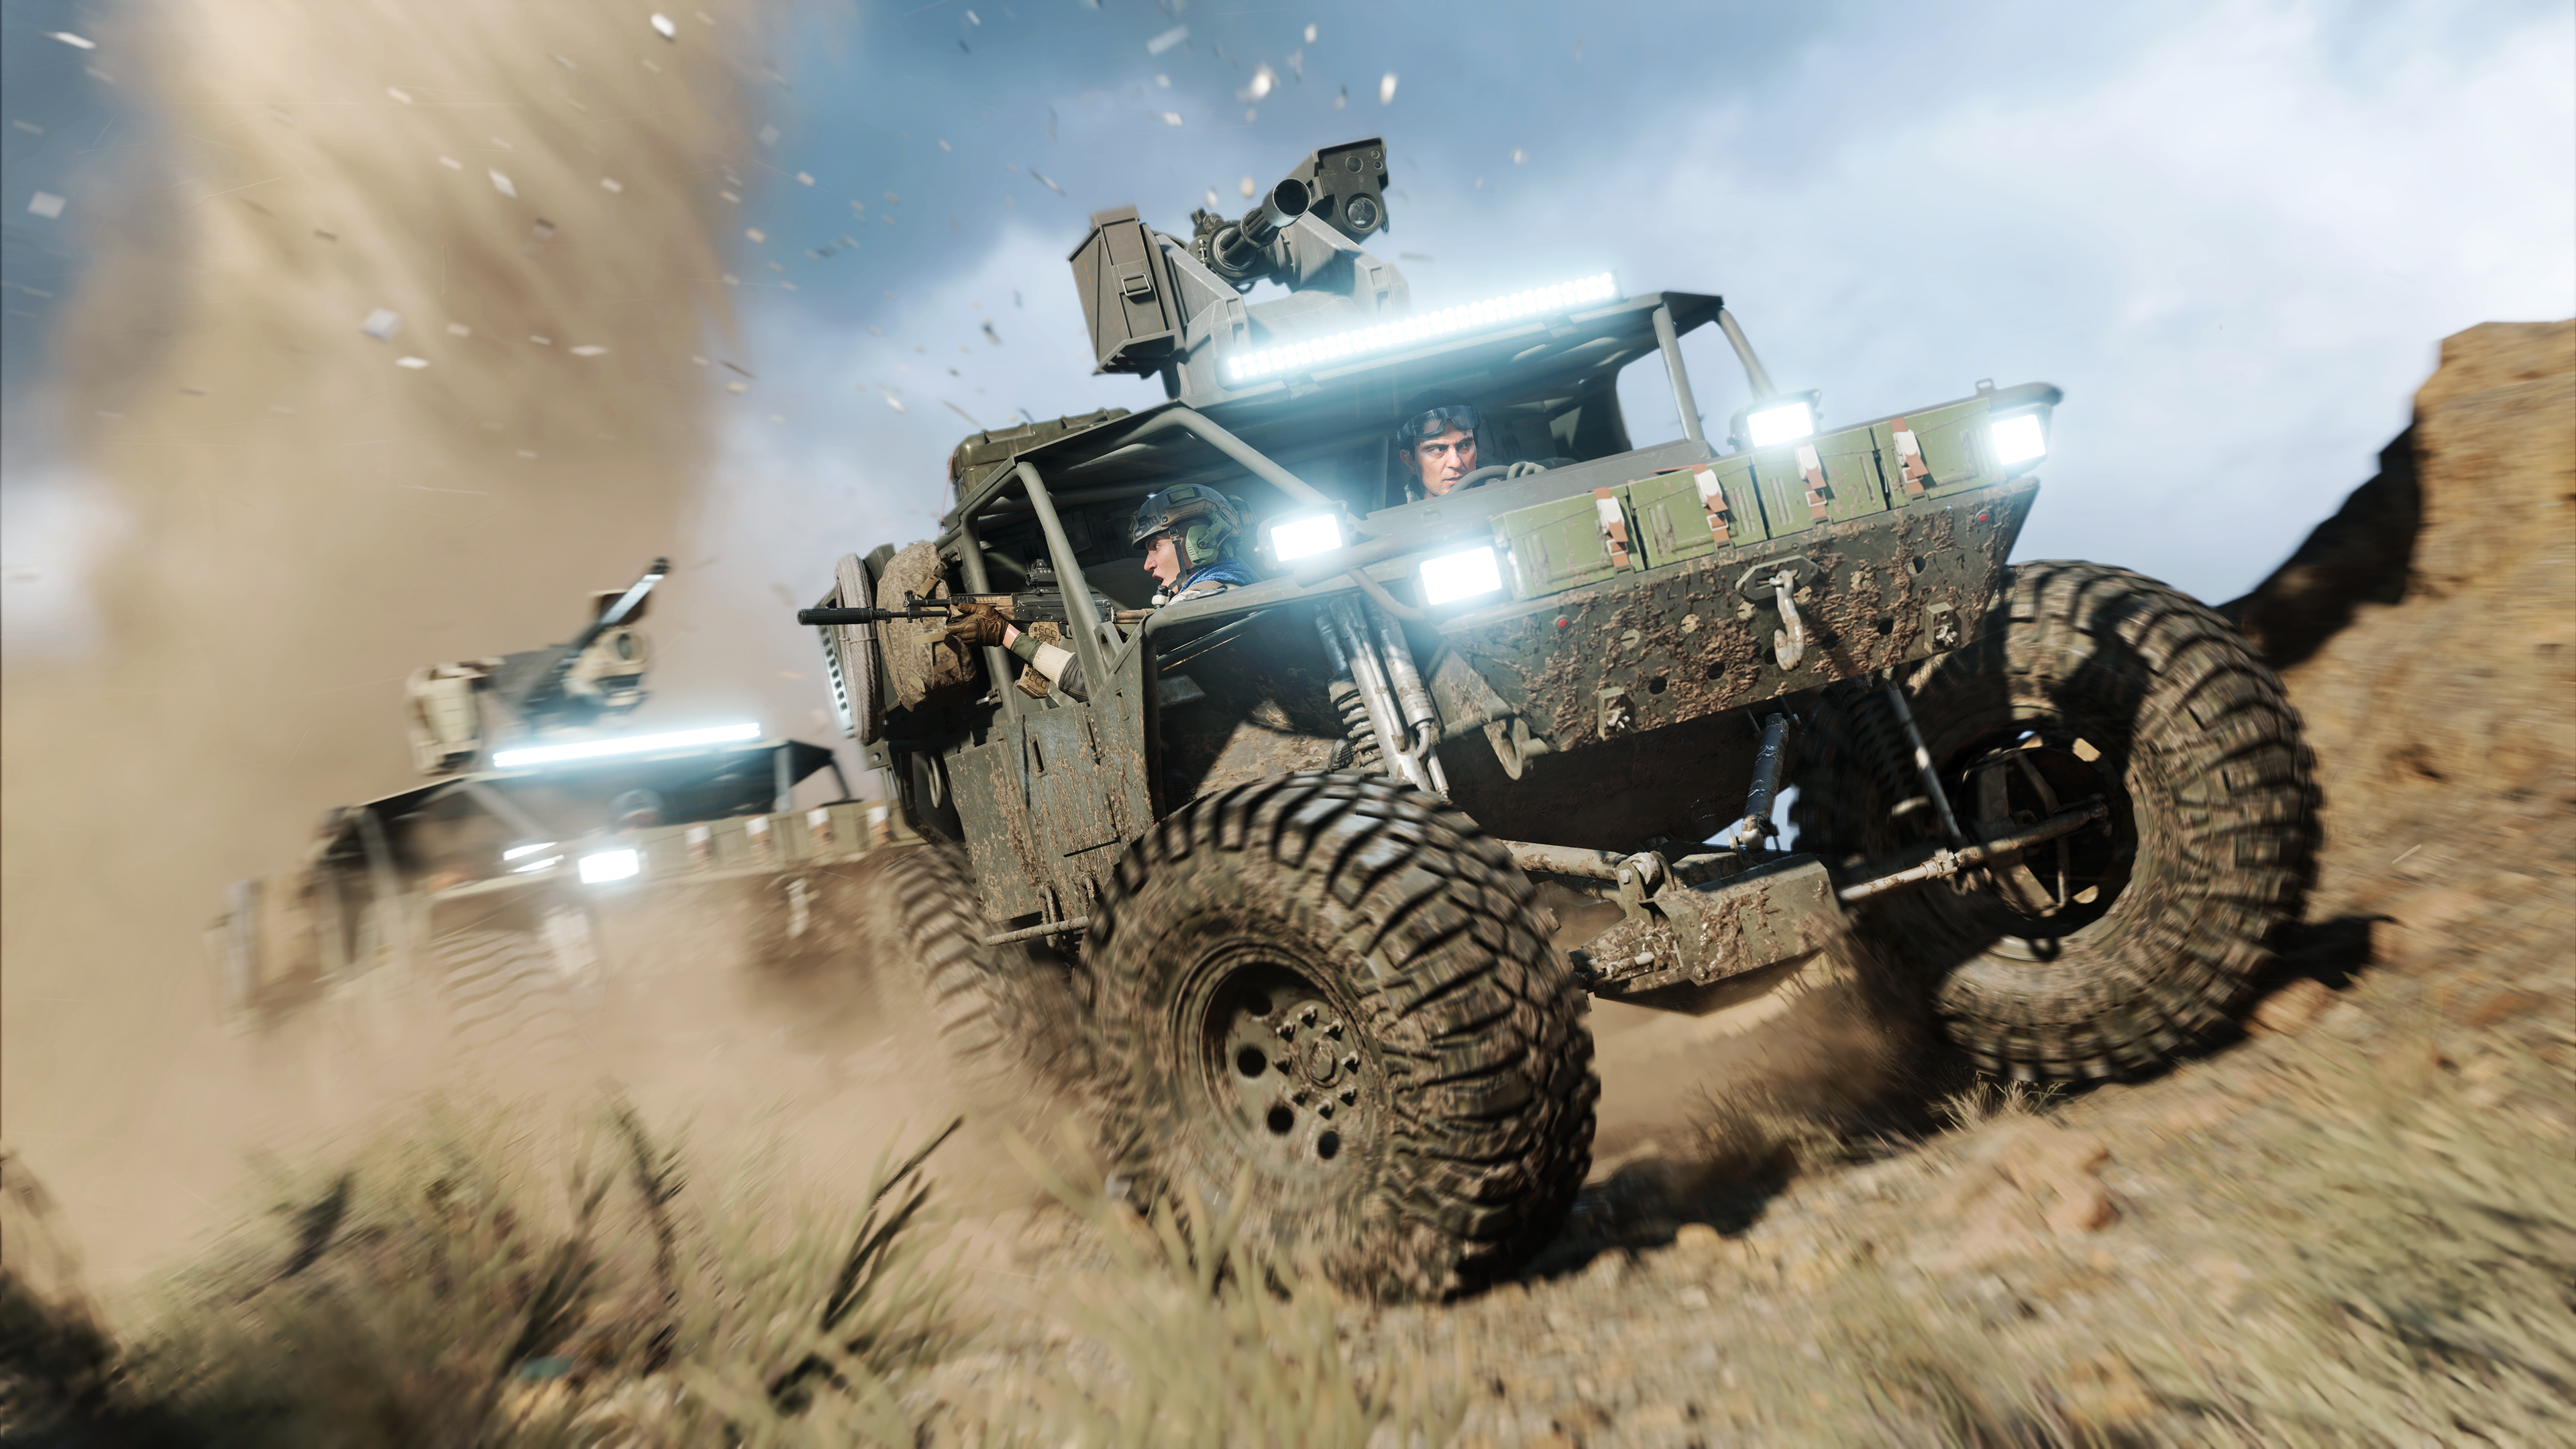 Battlefield 2042 release date and price confirmed — here's how to get early  access